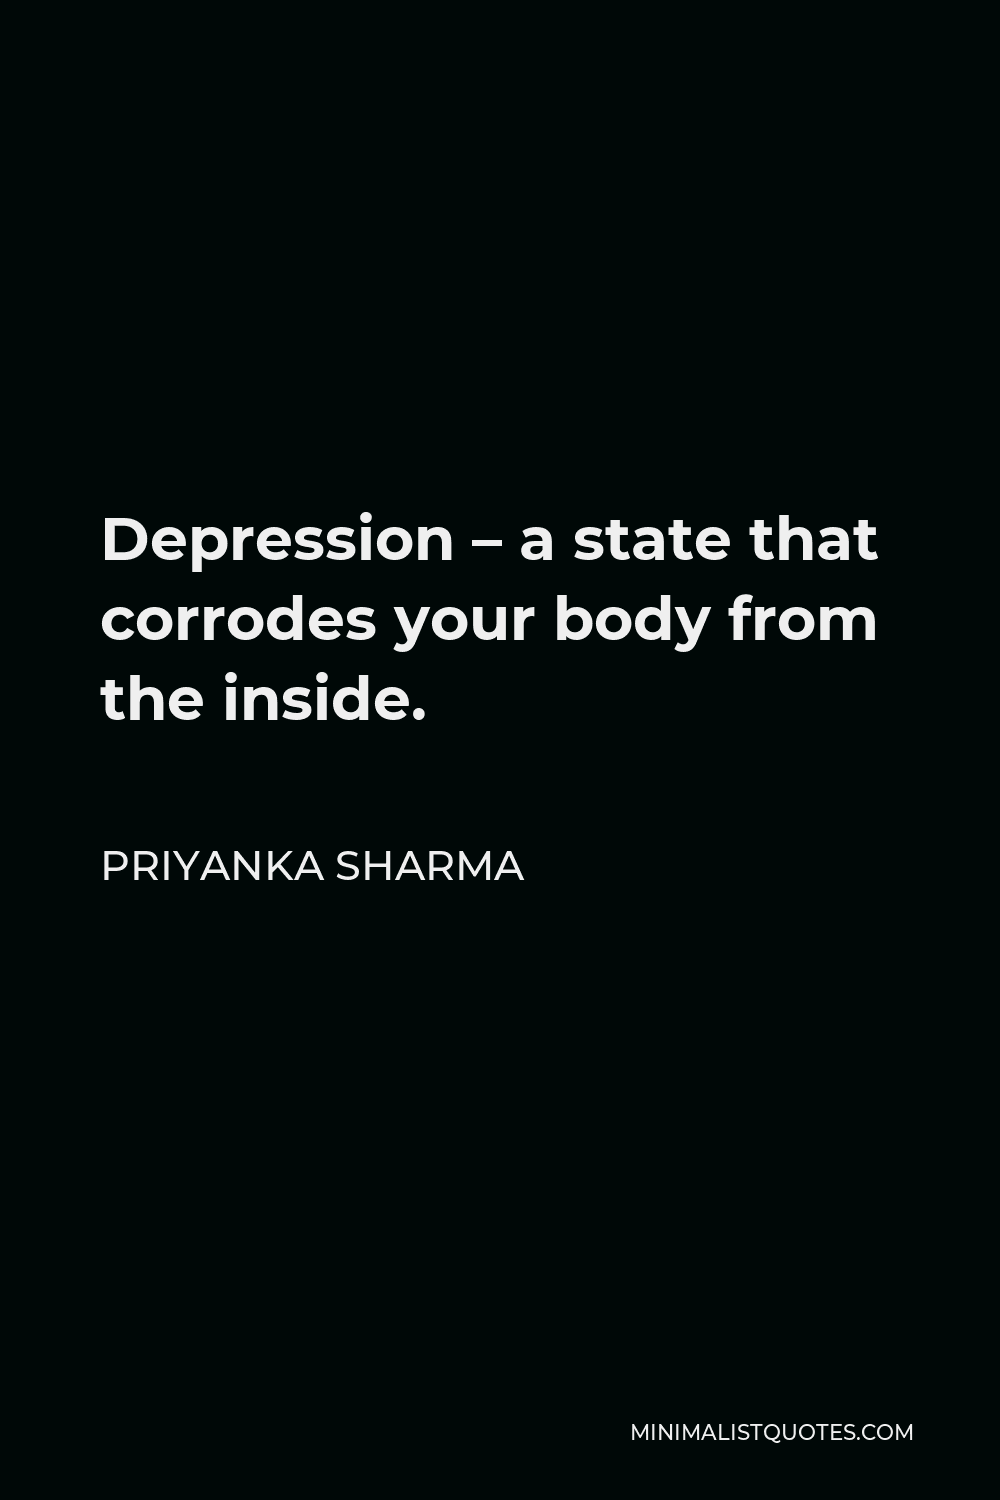 Priyanka Sharma Quote - Depression – a state that corrodes your body from the inside.